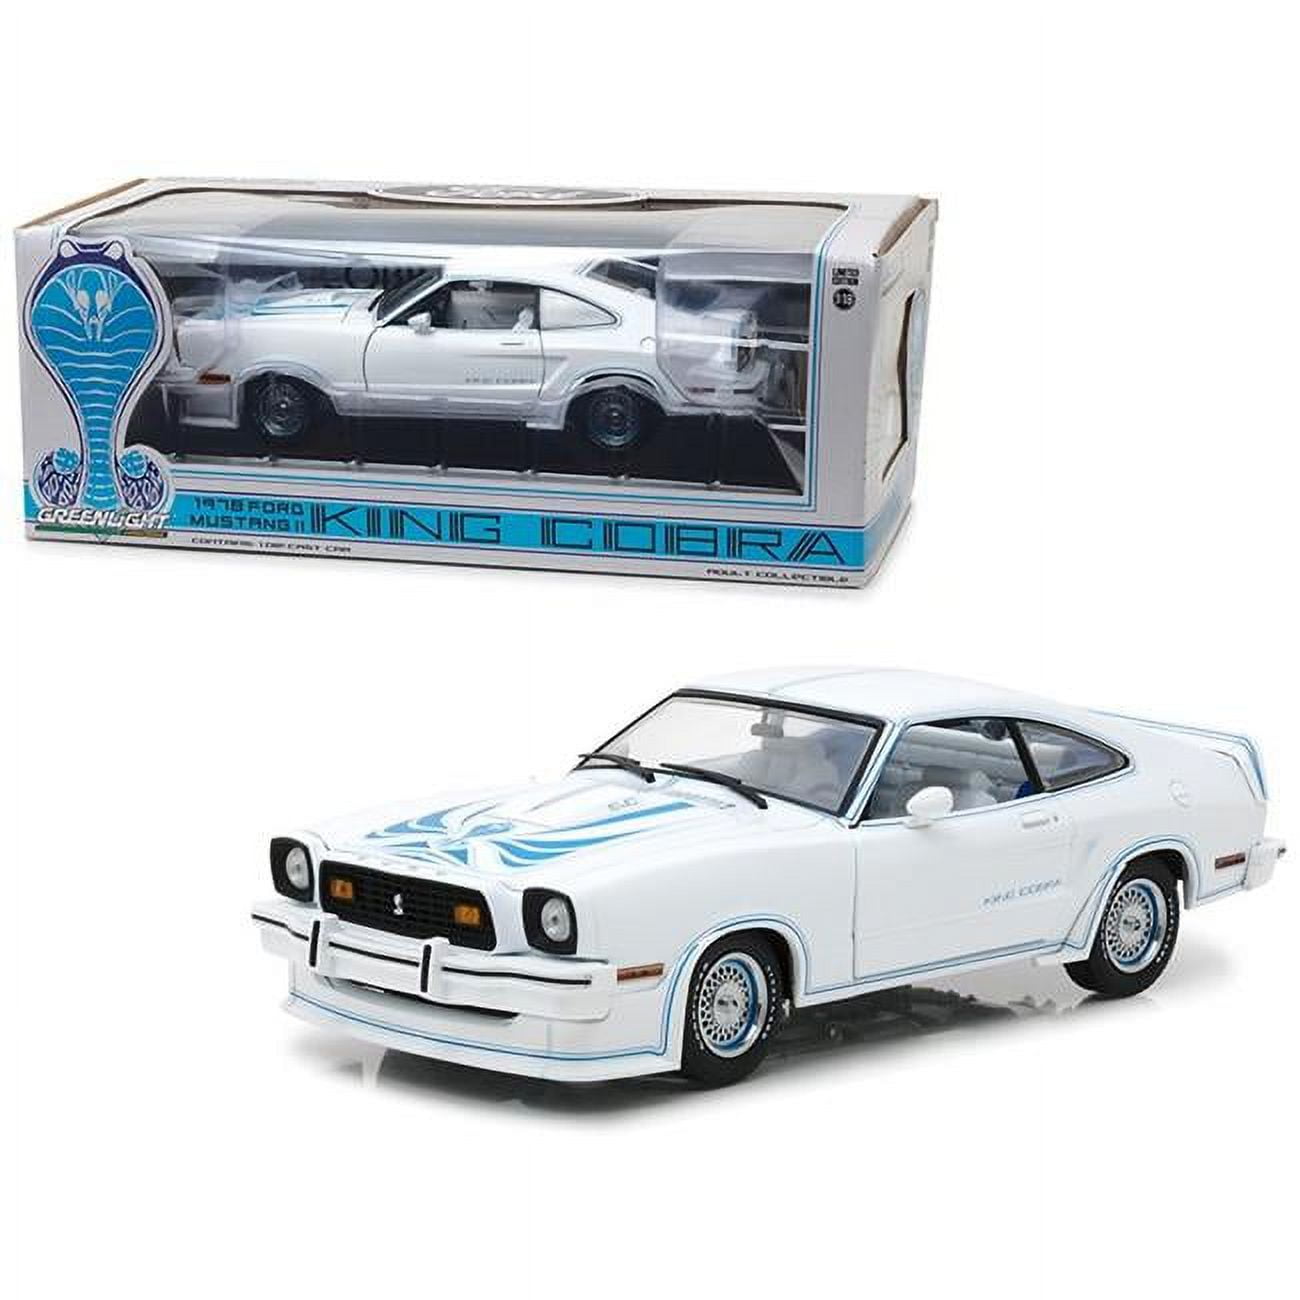 1978 Ford Mustang II King Cobra White 1/18 Diecast Car Model by Greenlight